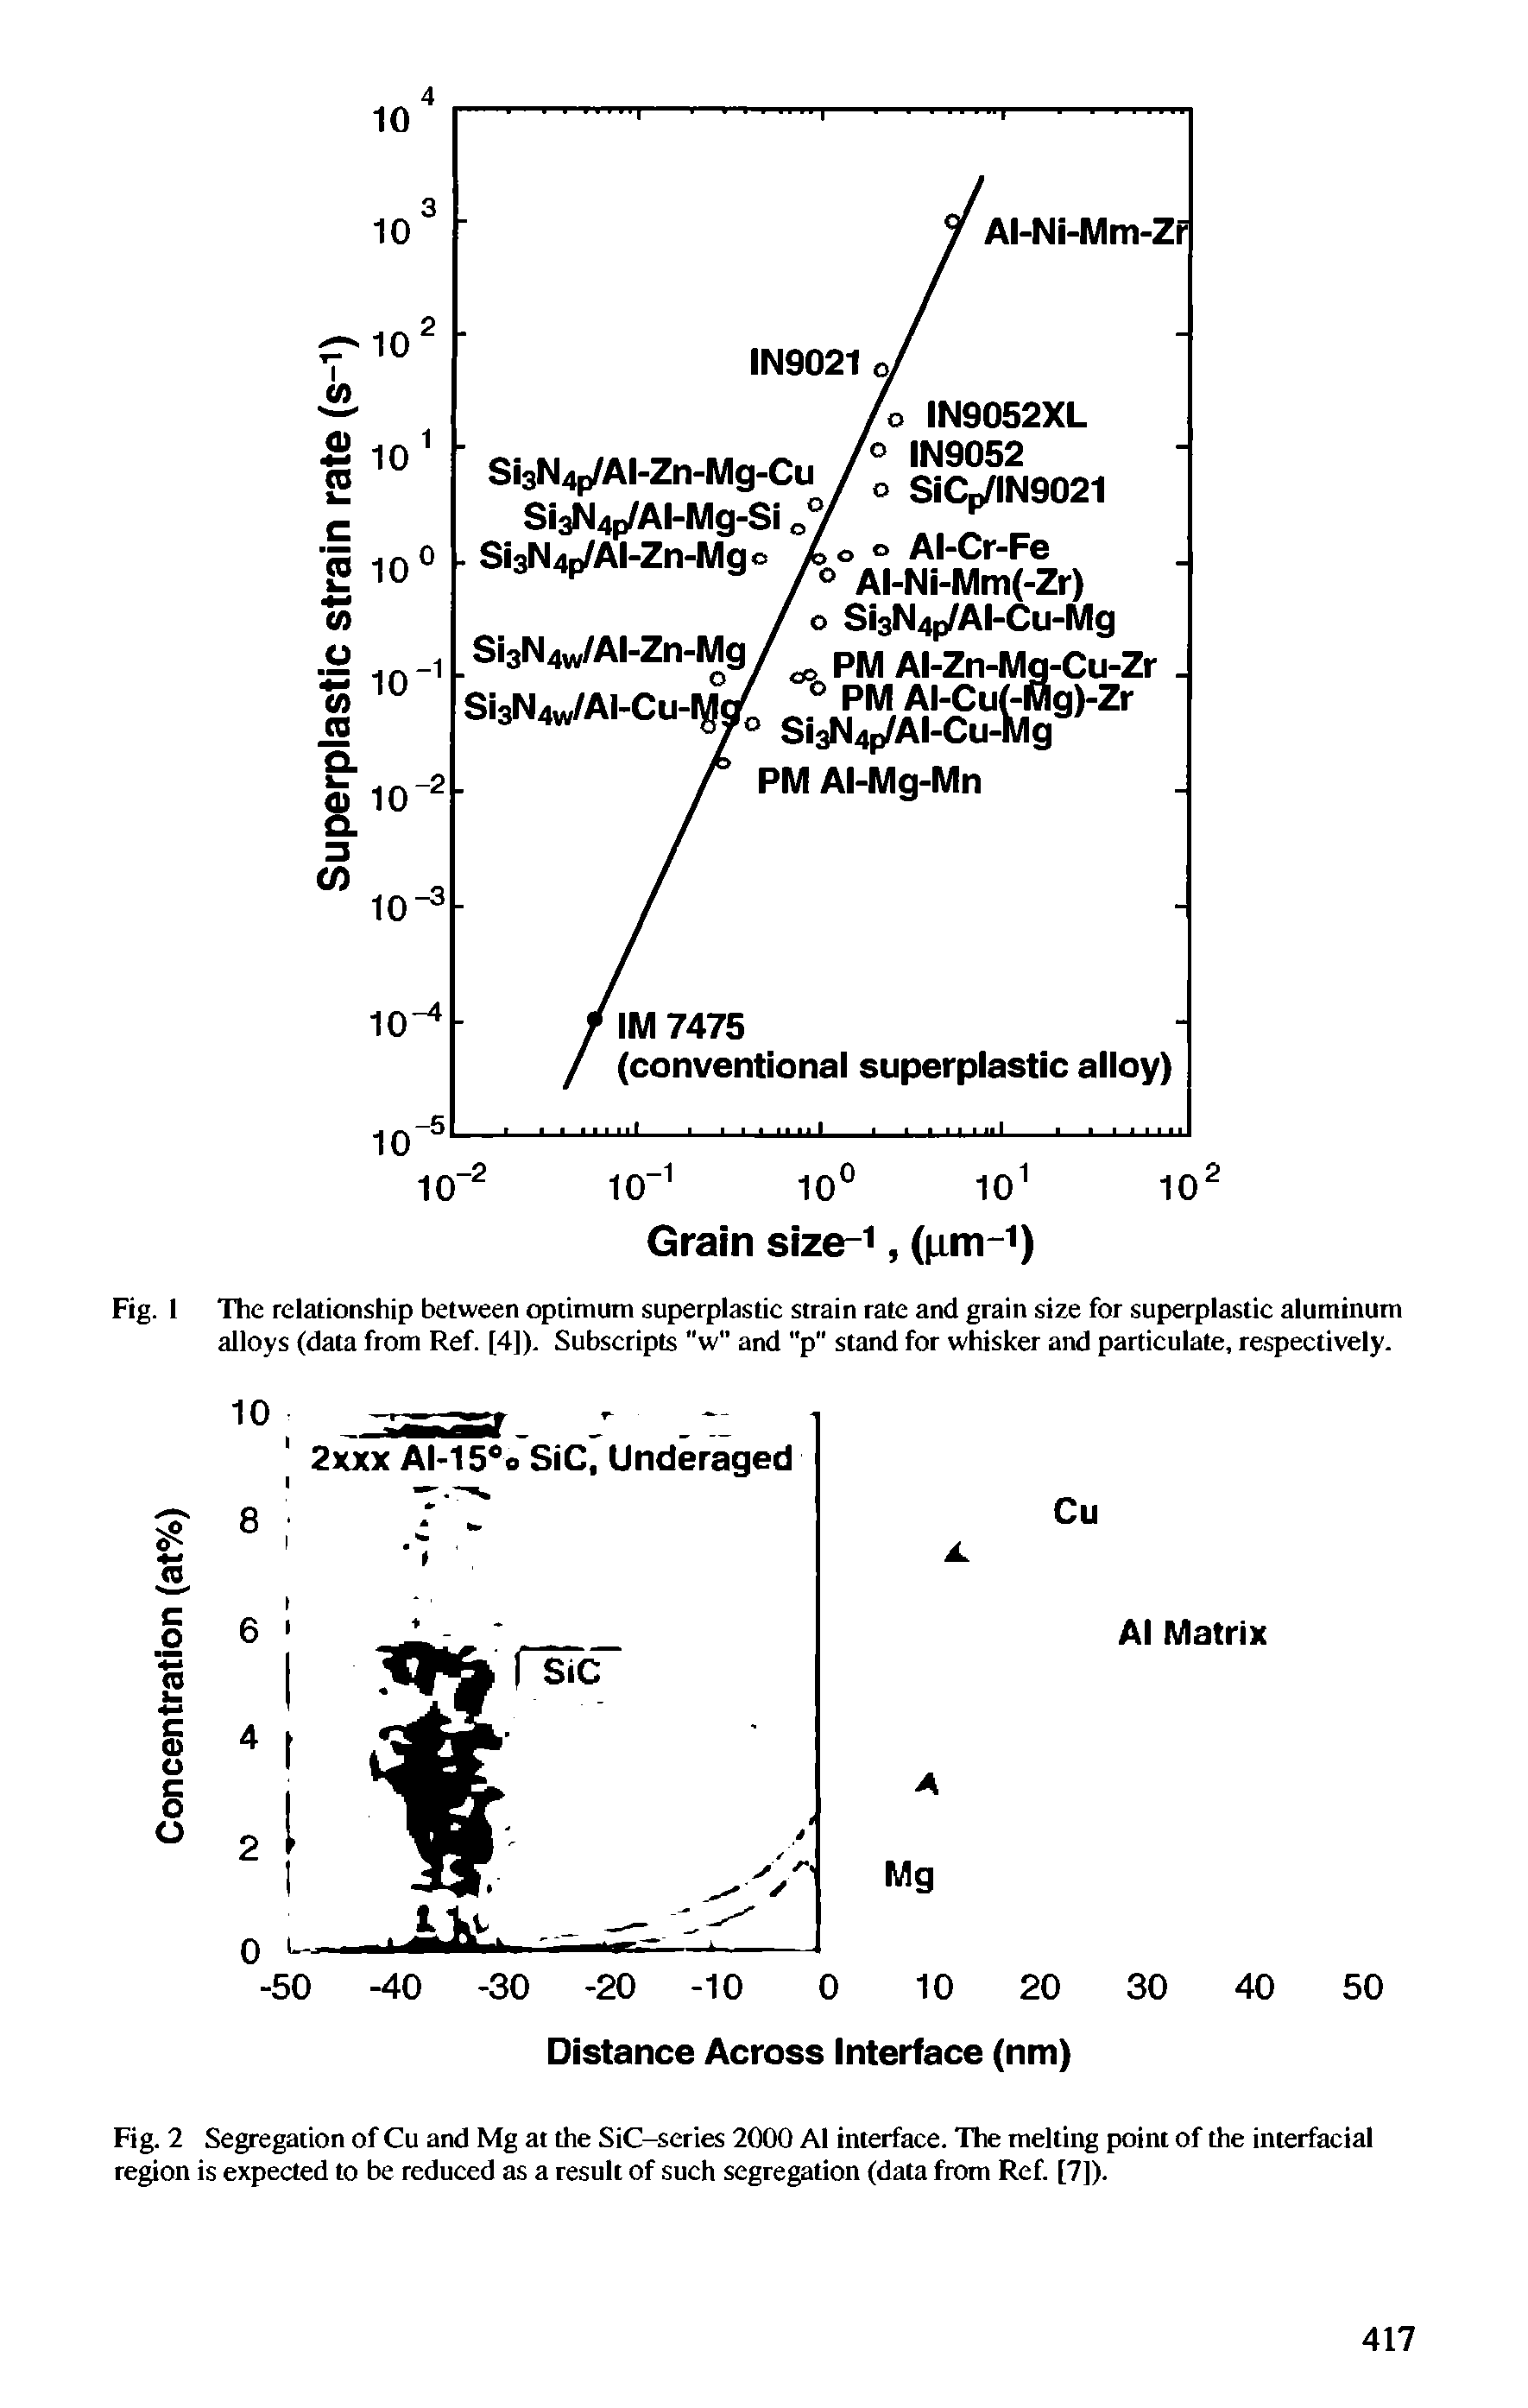 Fig. I The relationship between optimum superplastie strain rate and grain size for superplastie aluminum alloys (data from Ref. [4]). Subseripts "w" and "p" stand for whisker and partieulate, respectively.